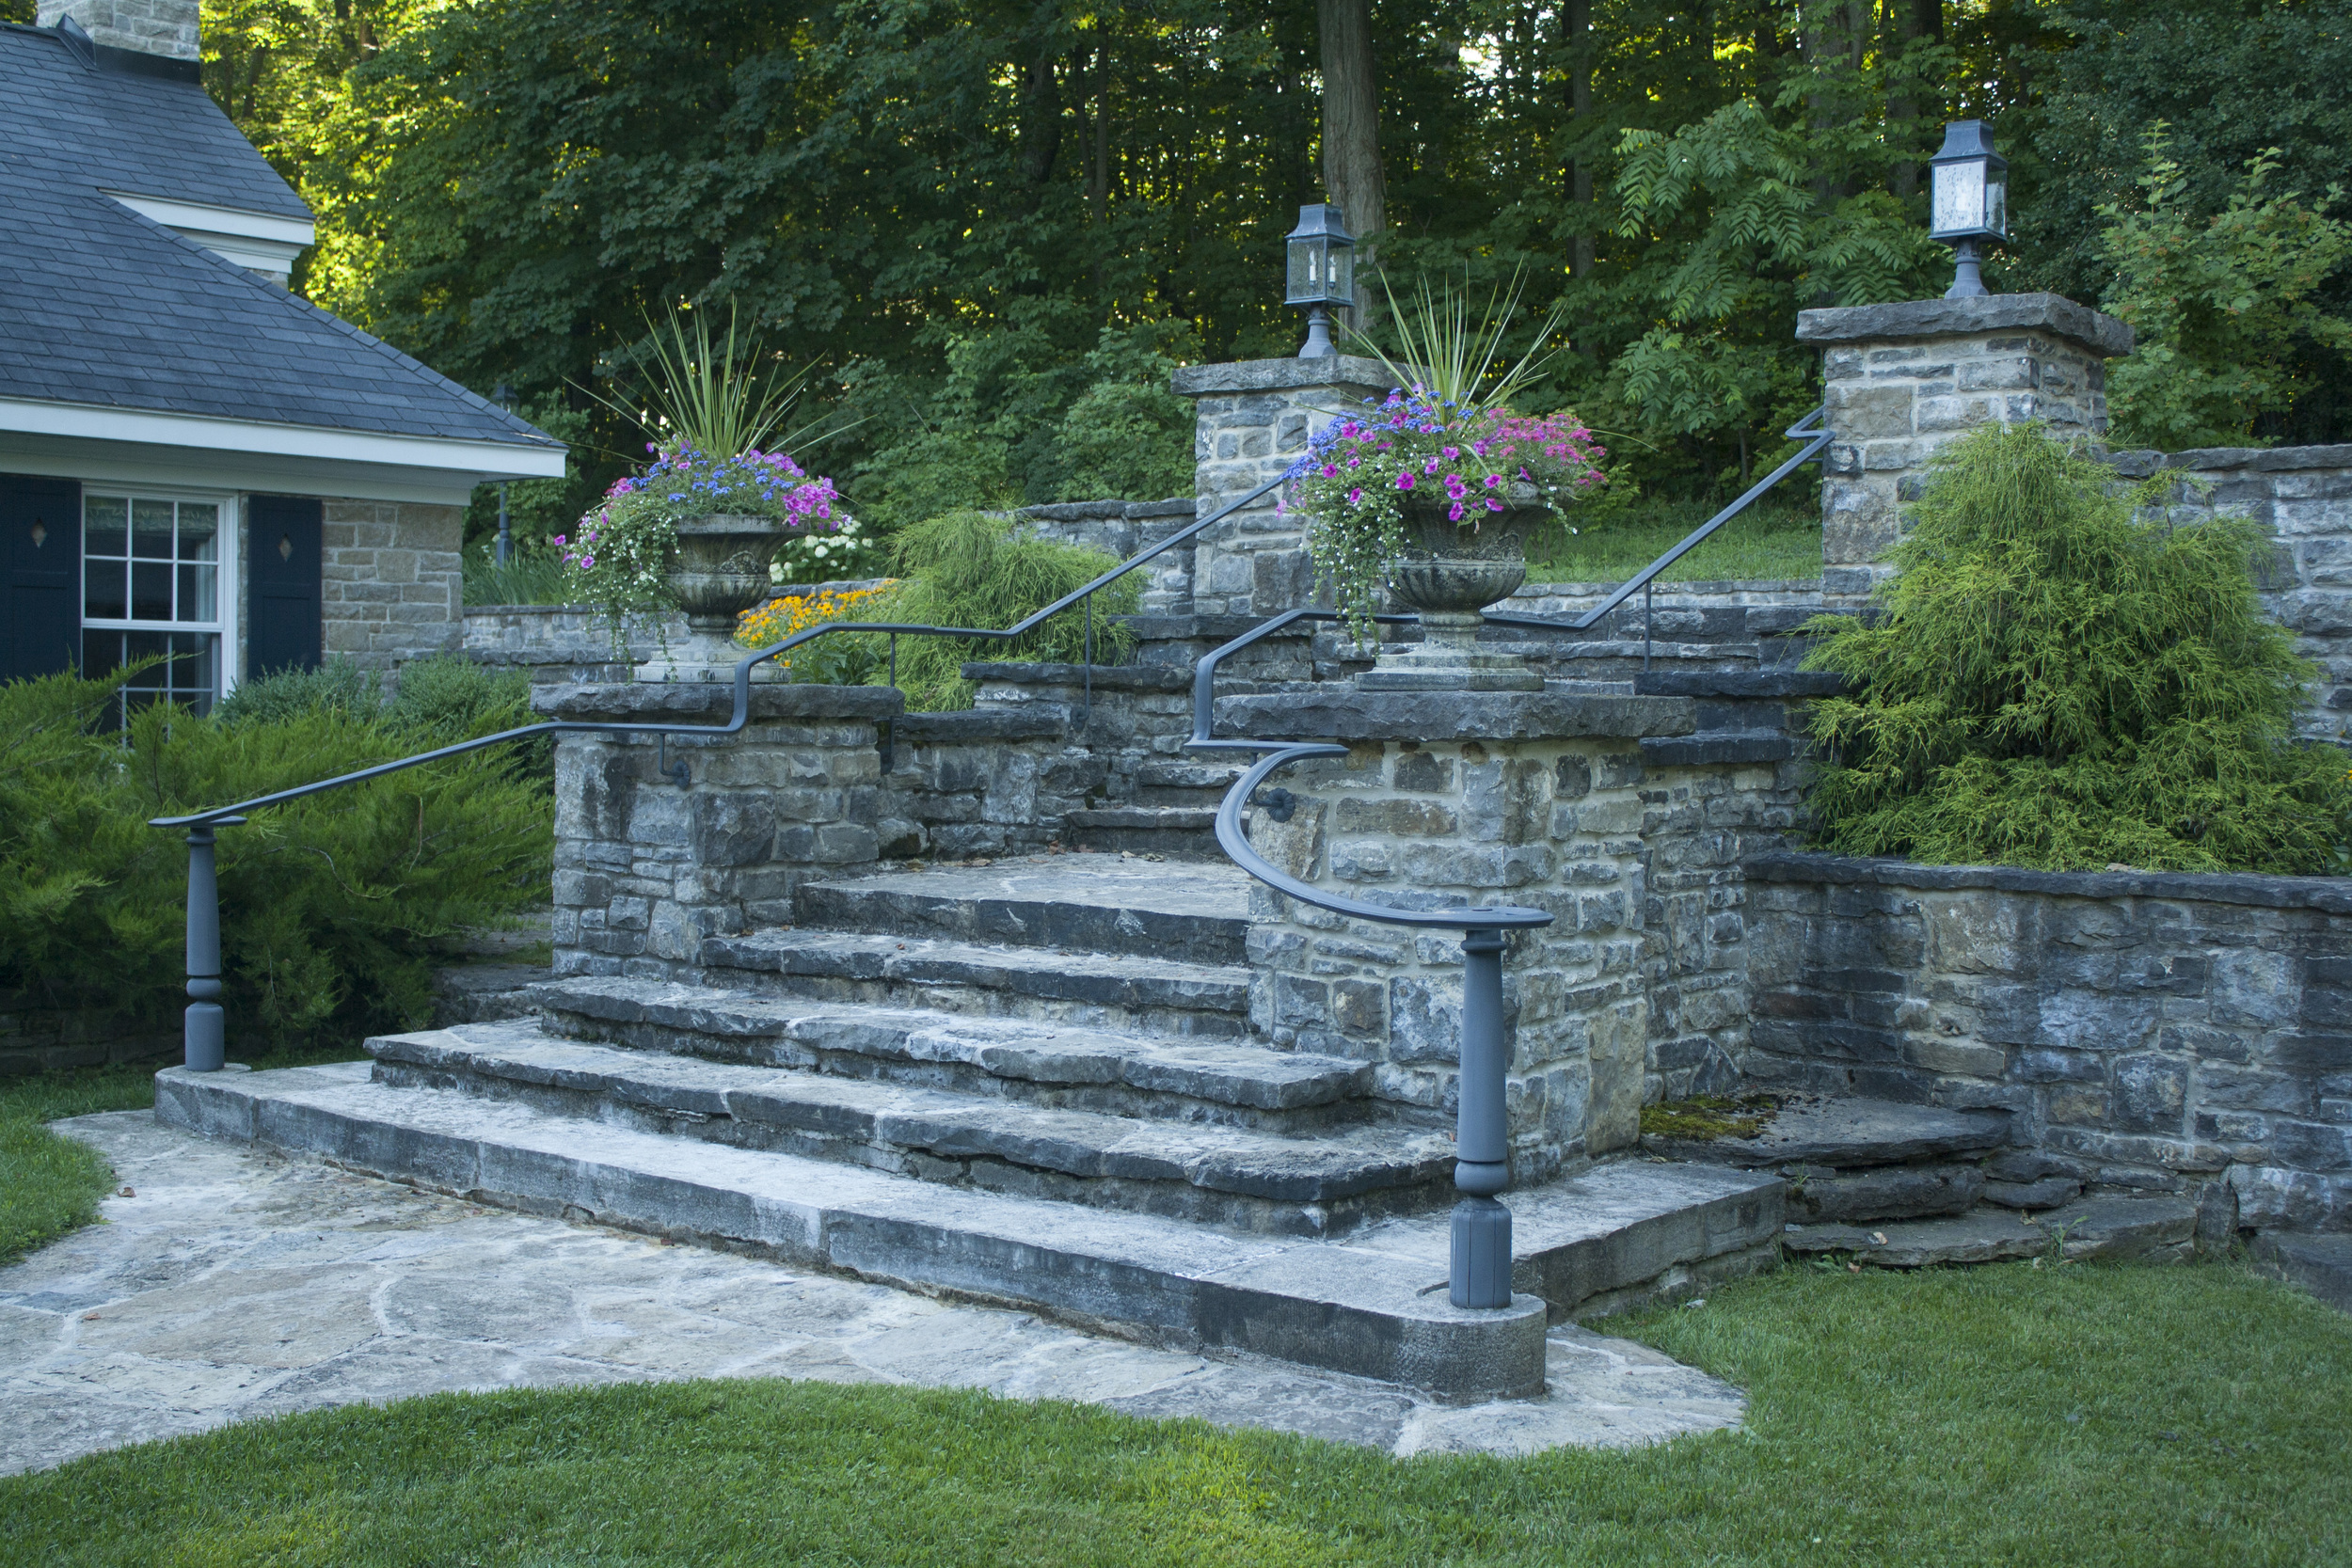 New Home With A Heritage Feel | Stone Staircase | Landscape Architecture | Riverview Design Solutions | Prescott, Ontario, Canada